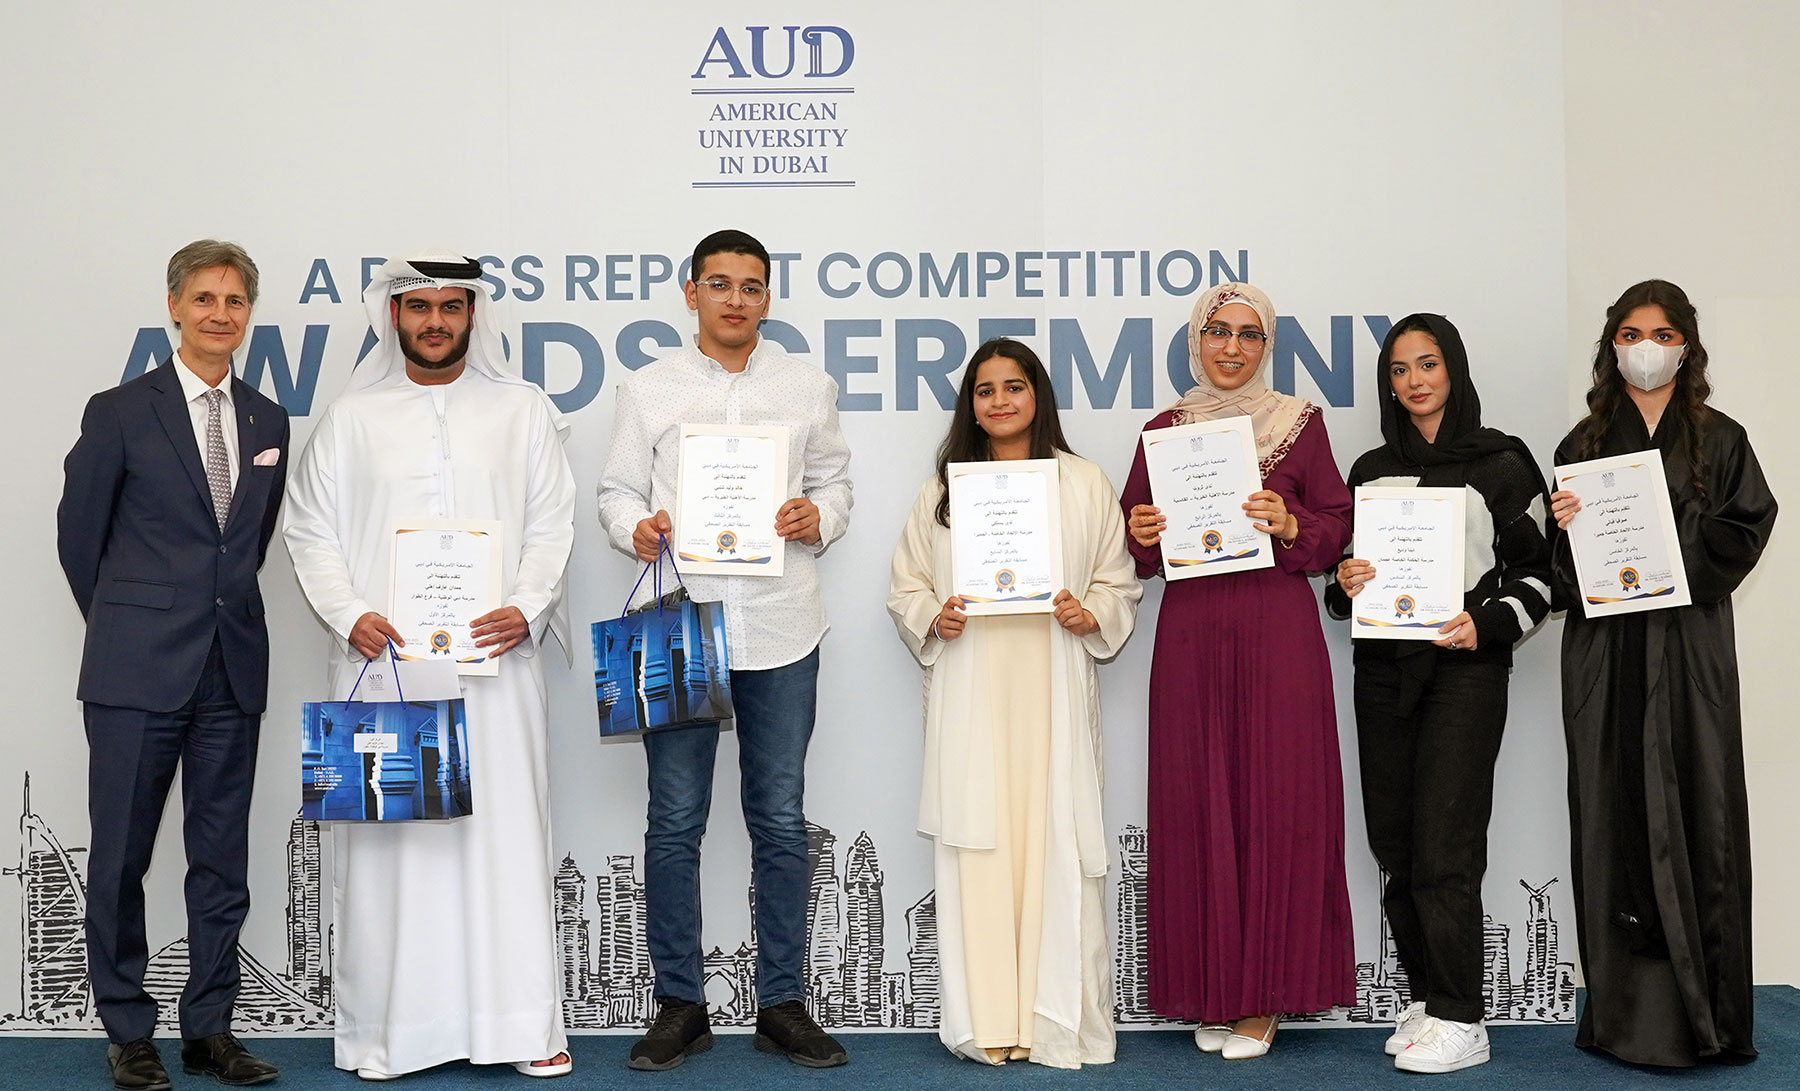 AUD offers two scholarships to the winners of the Press Report Competition